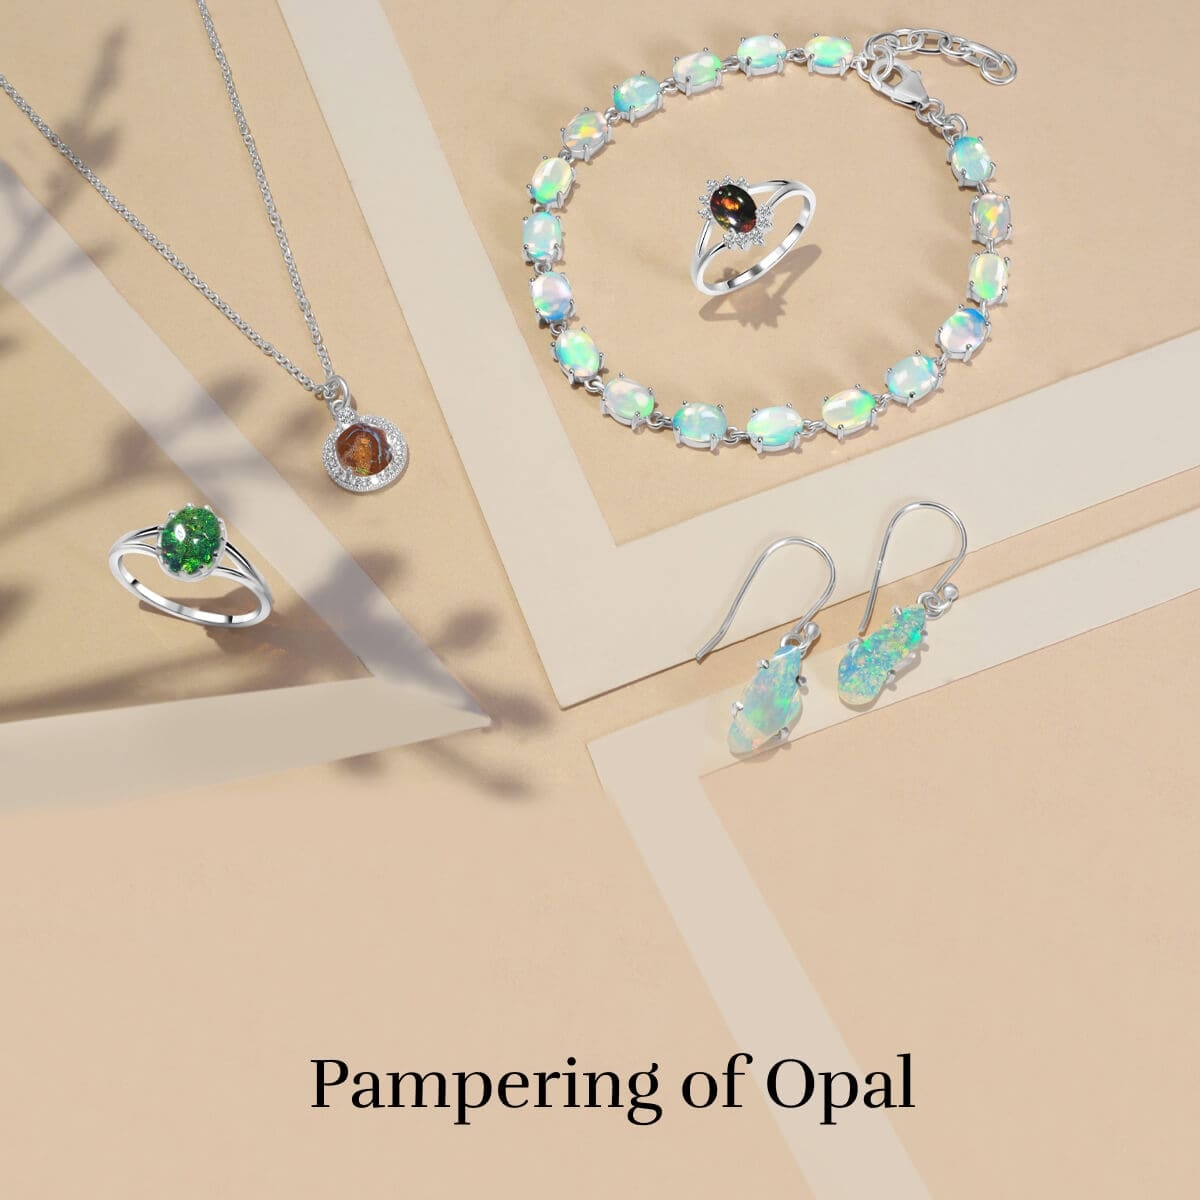 How to clean and take care of Opal